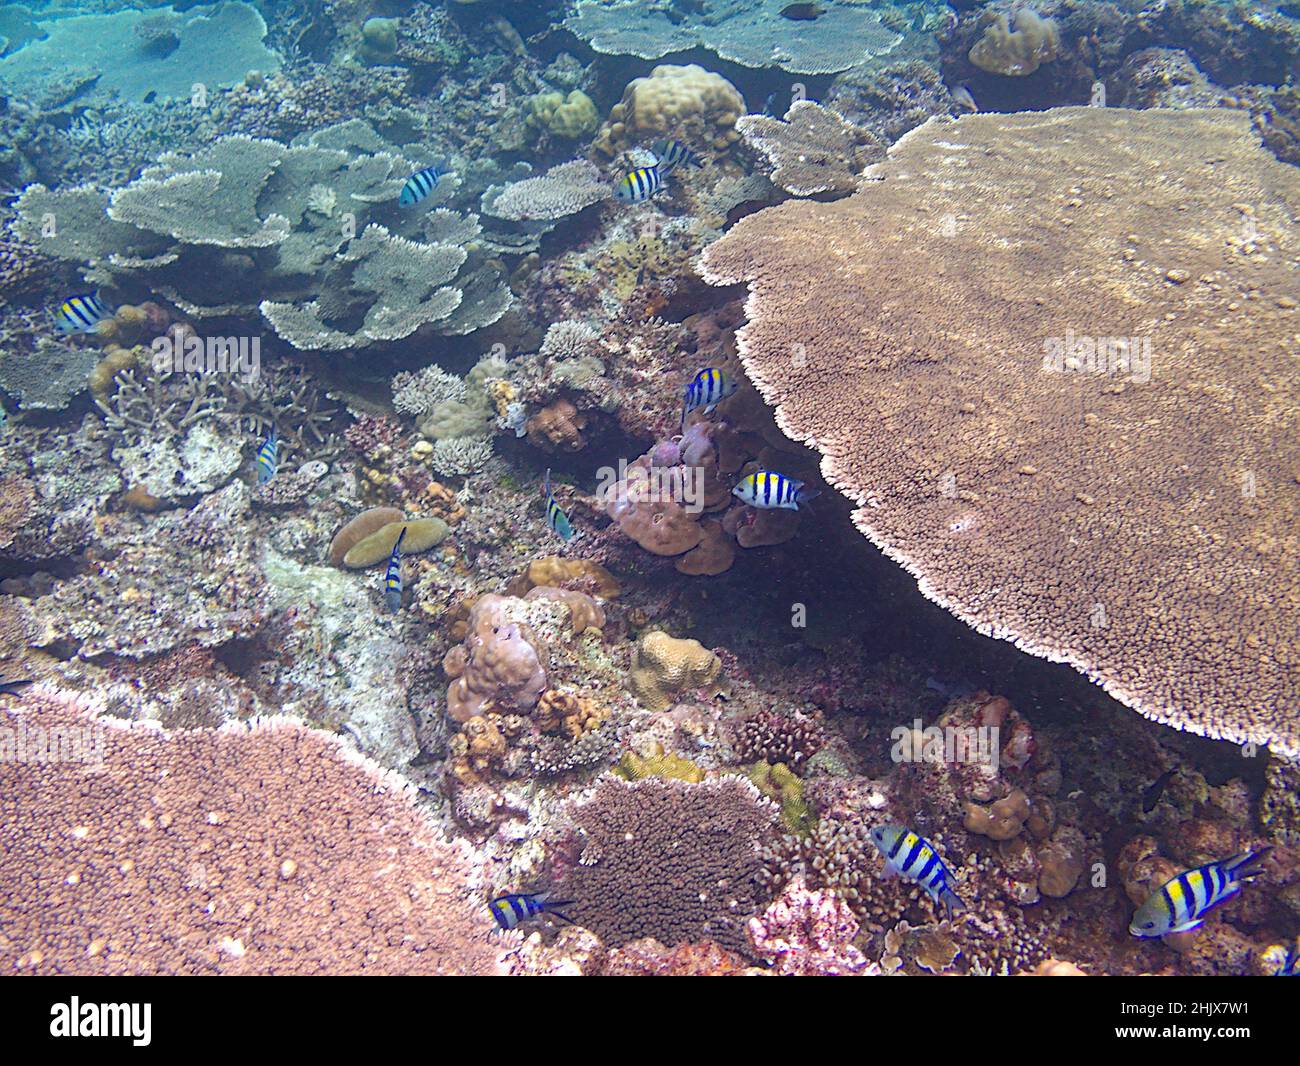 table corals in the sea Stock Photo